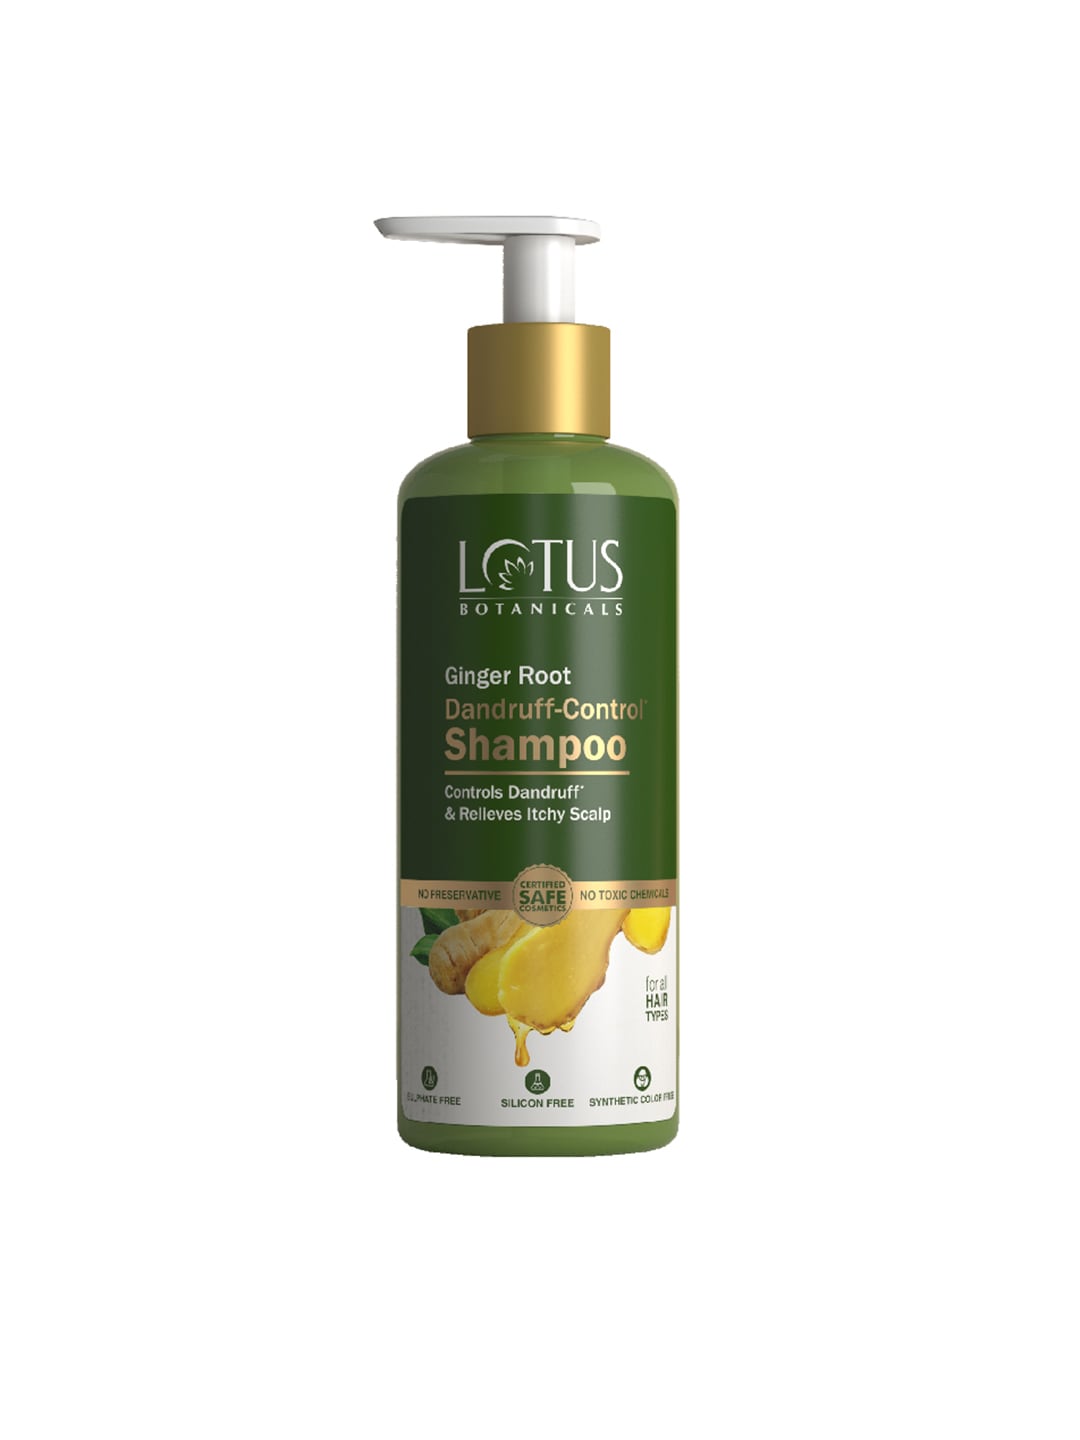 Lotus Botanicals Ginger Root Dandruff-Control Shampoo with Tea Tree Oil 300 ml Price in India